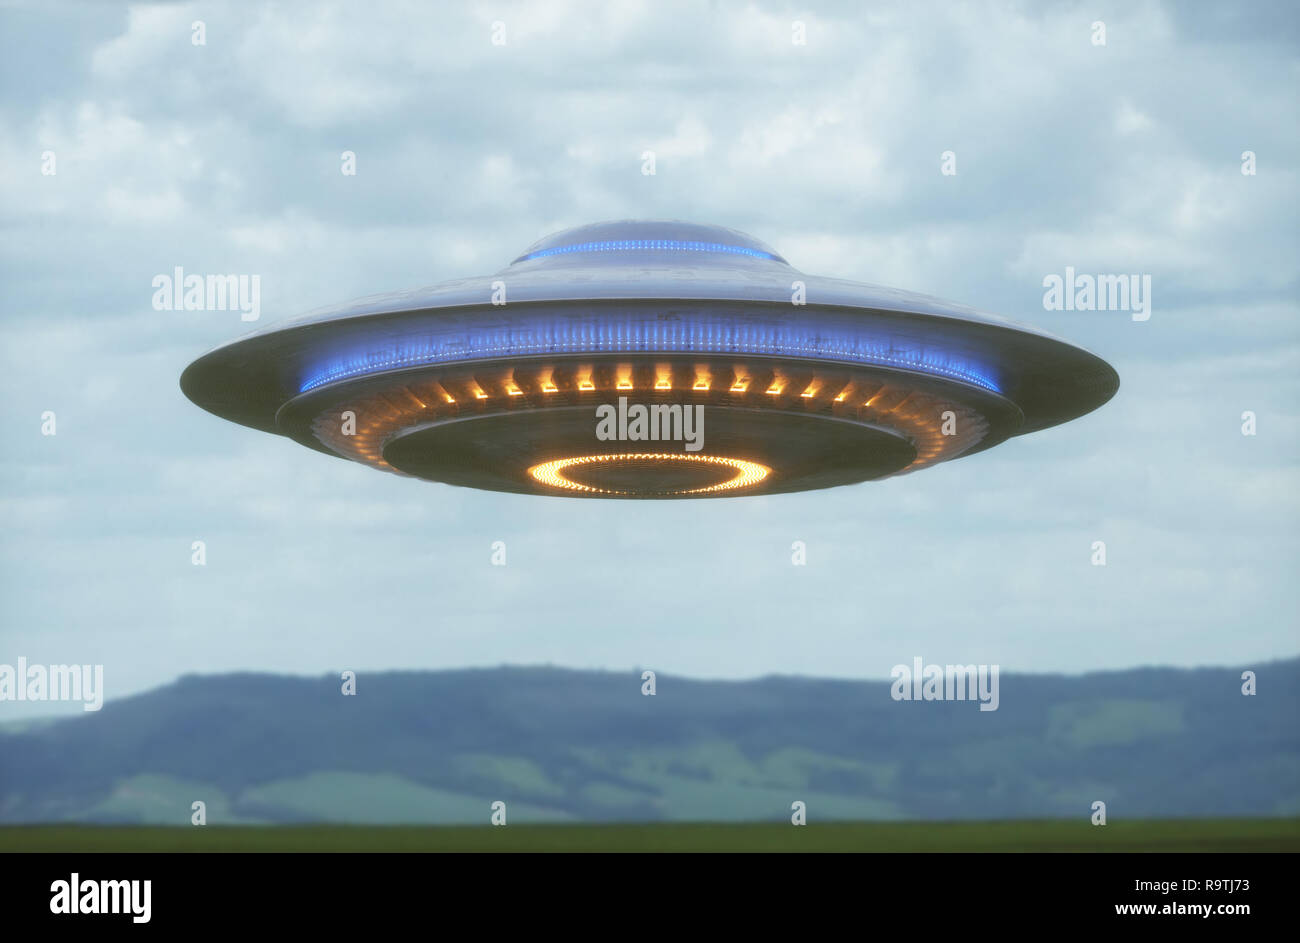 Unidentified flying object. UFO with clipping path included. 3D illustration in real picture. Stock Photo